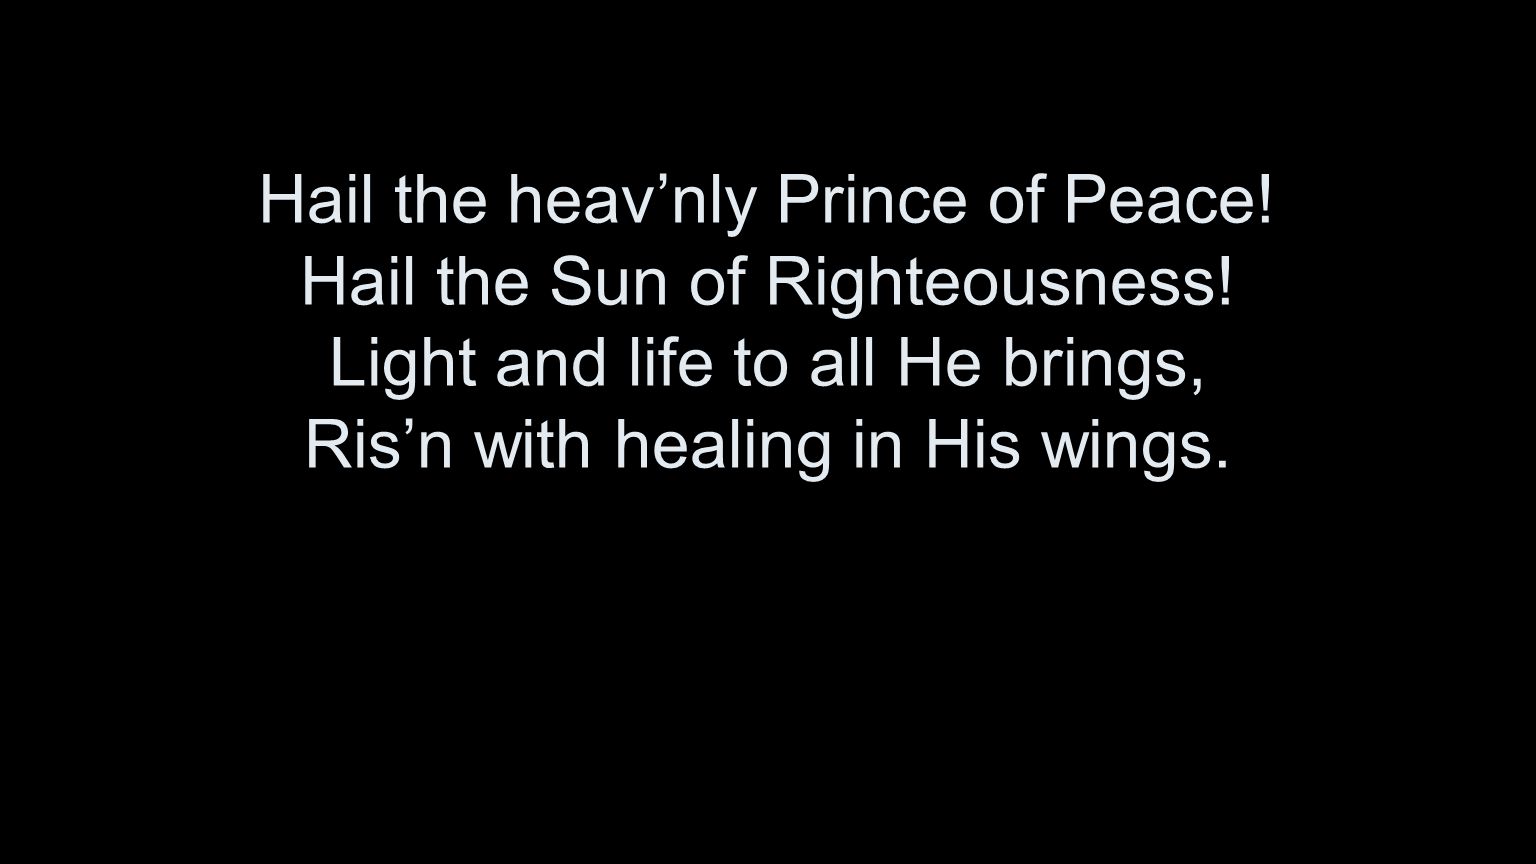 Hail the heav’nly Prince of Peace. Hail the Sun of Righteousness.